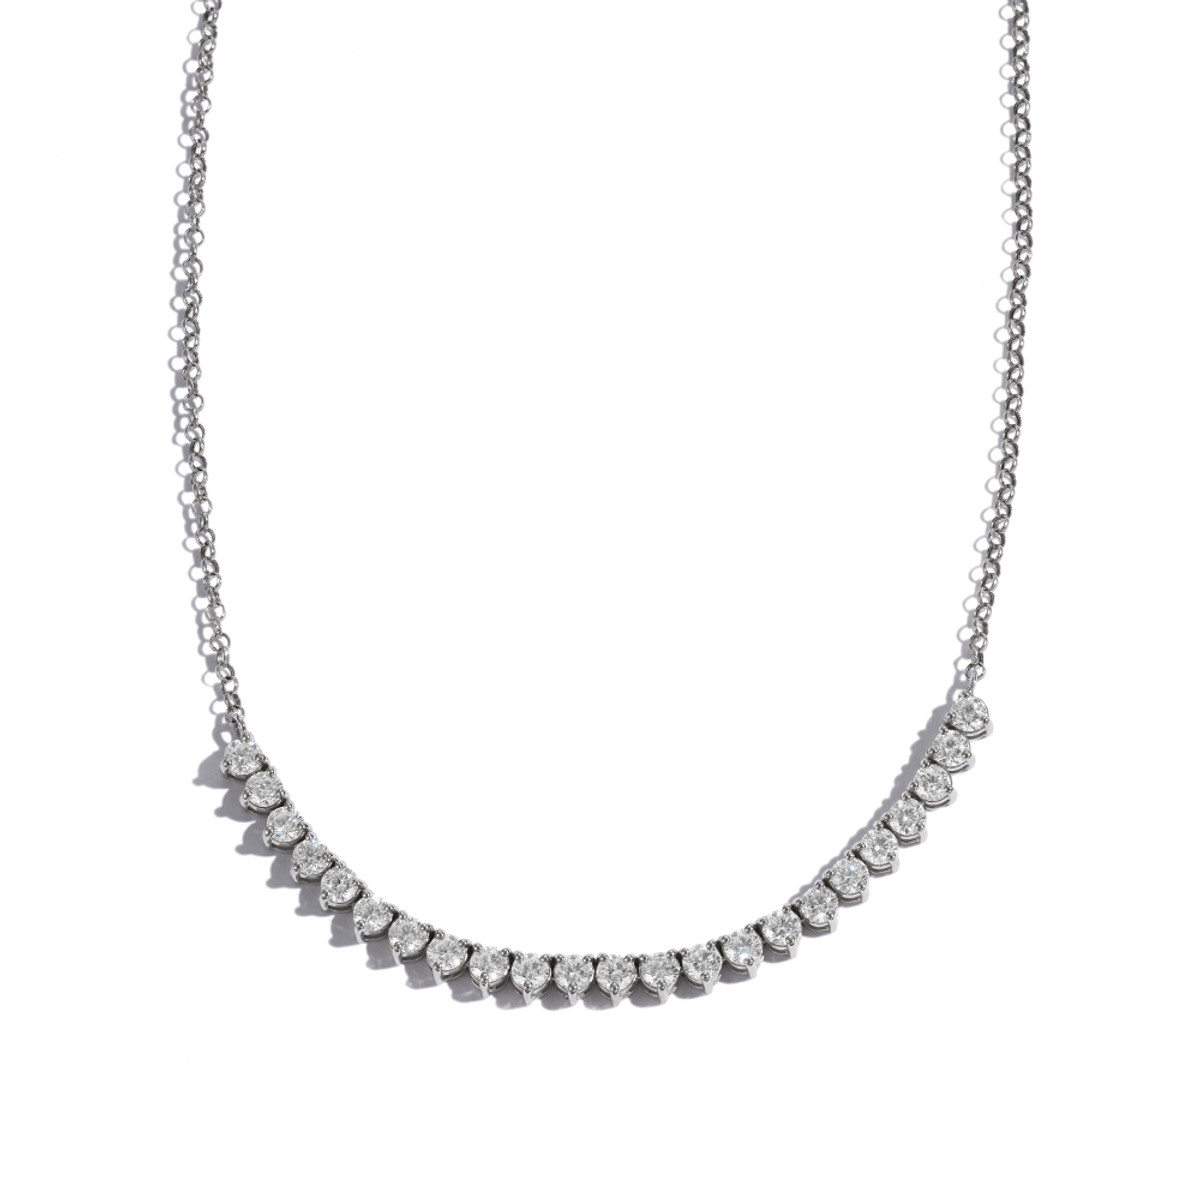 Hyde Park 18k White Gold 23-Round Floating 2.79ct Diamond Necklace-44018 Product Image